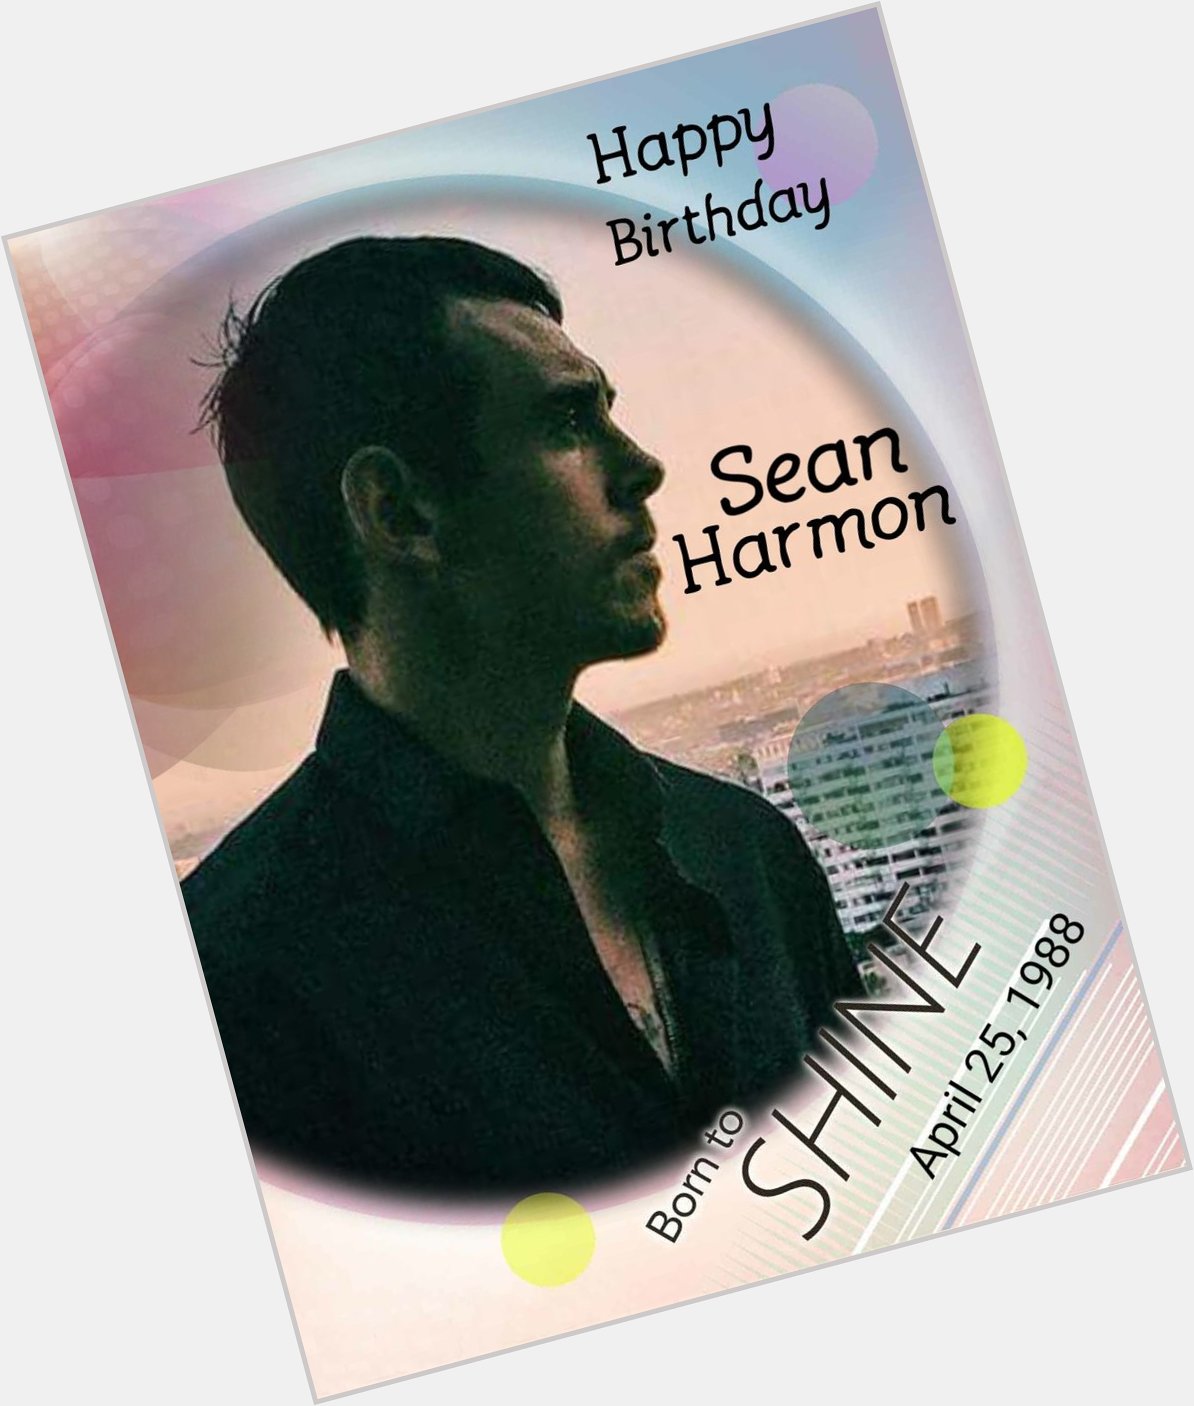  Have a Very Happy Birthday to Sean Harmon. May All Your Wishes Come True. 